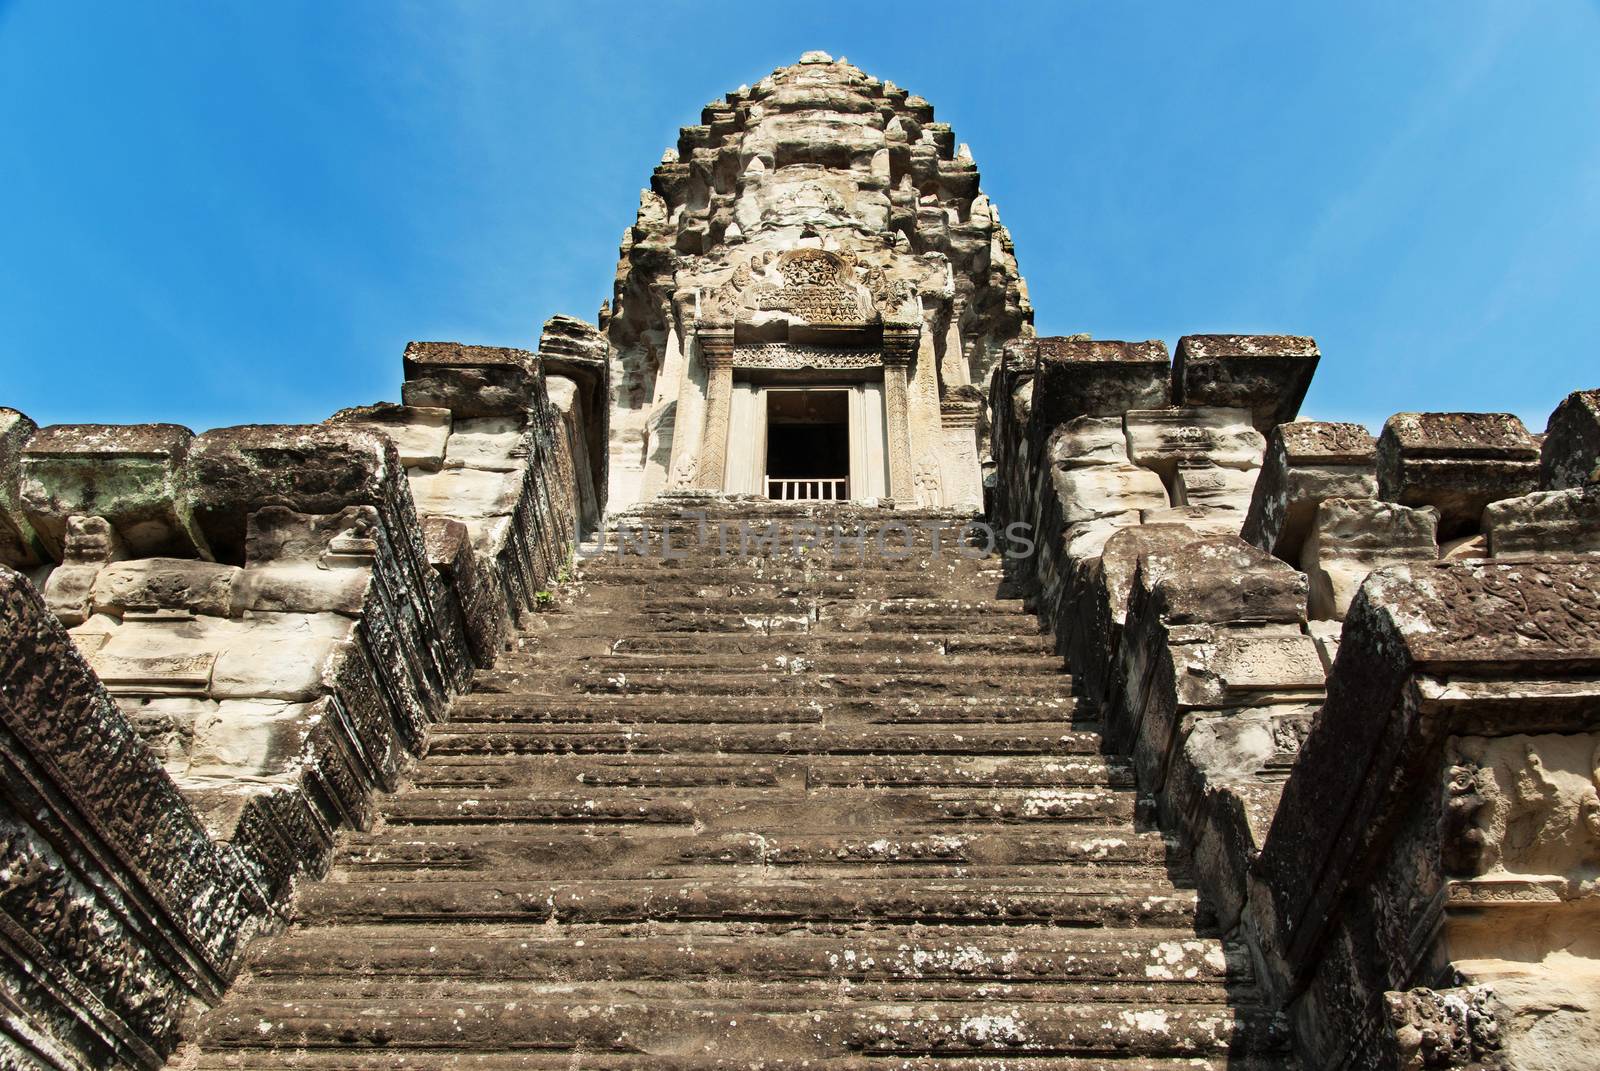 Stone steps leading to Angkor Wat stone tower, Cambodia, Asia 